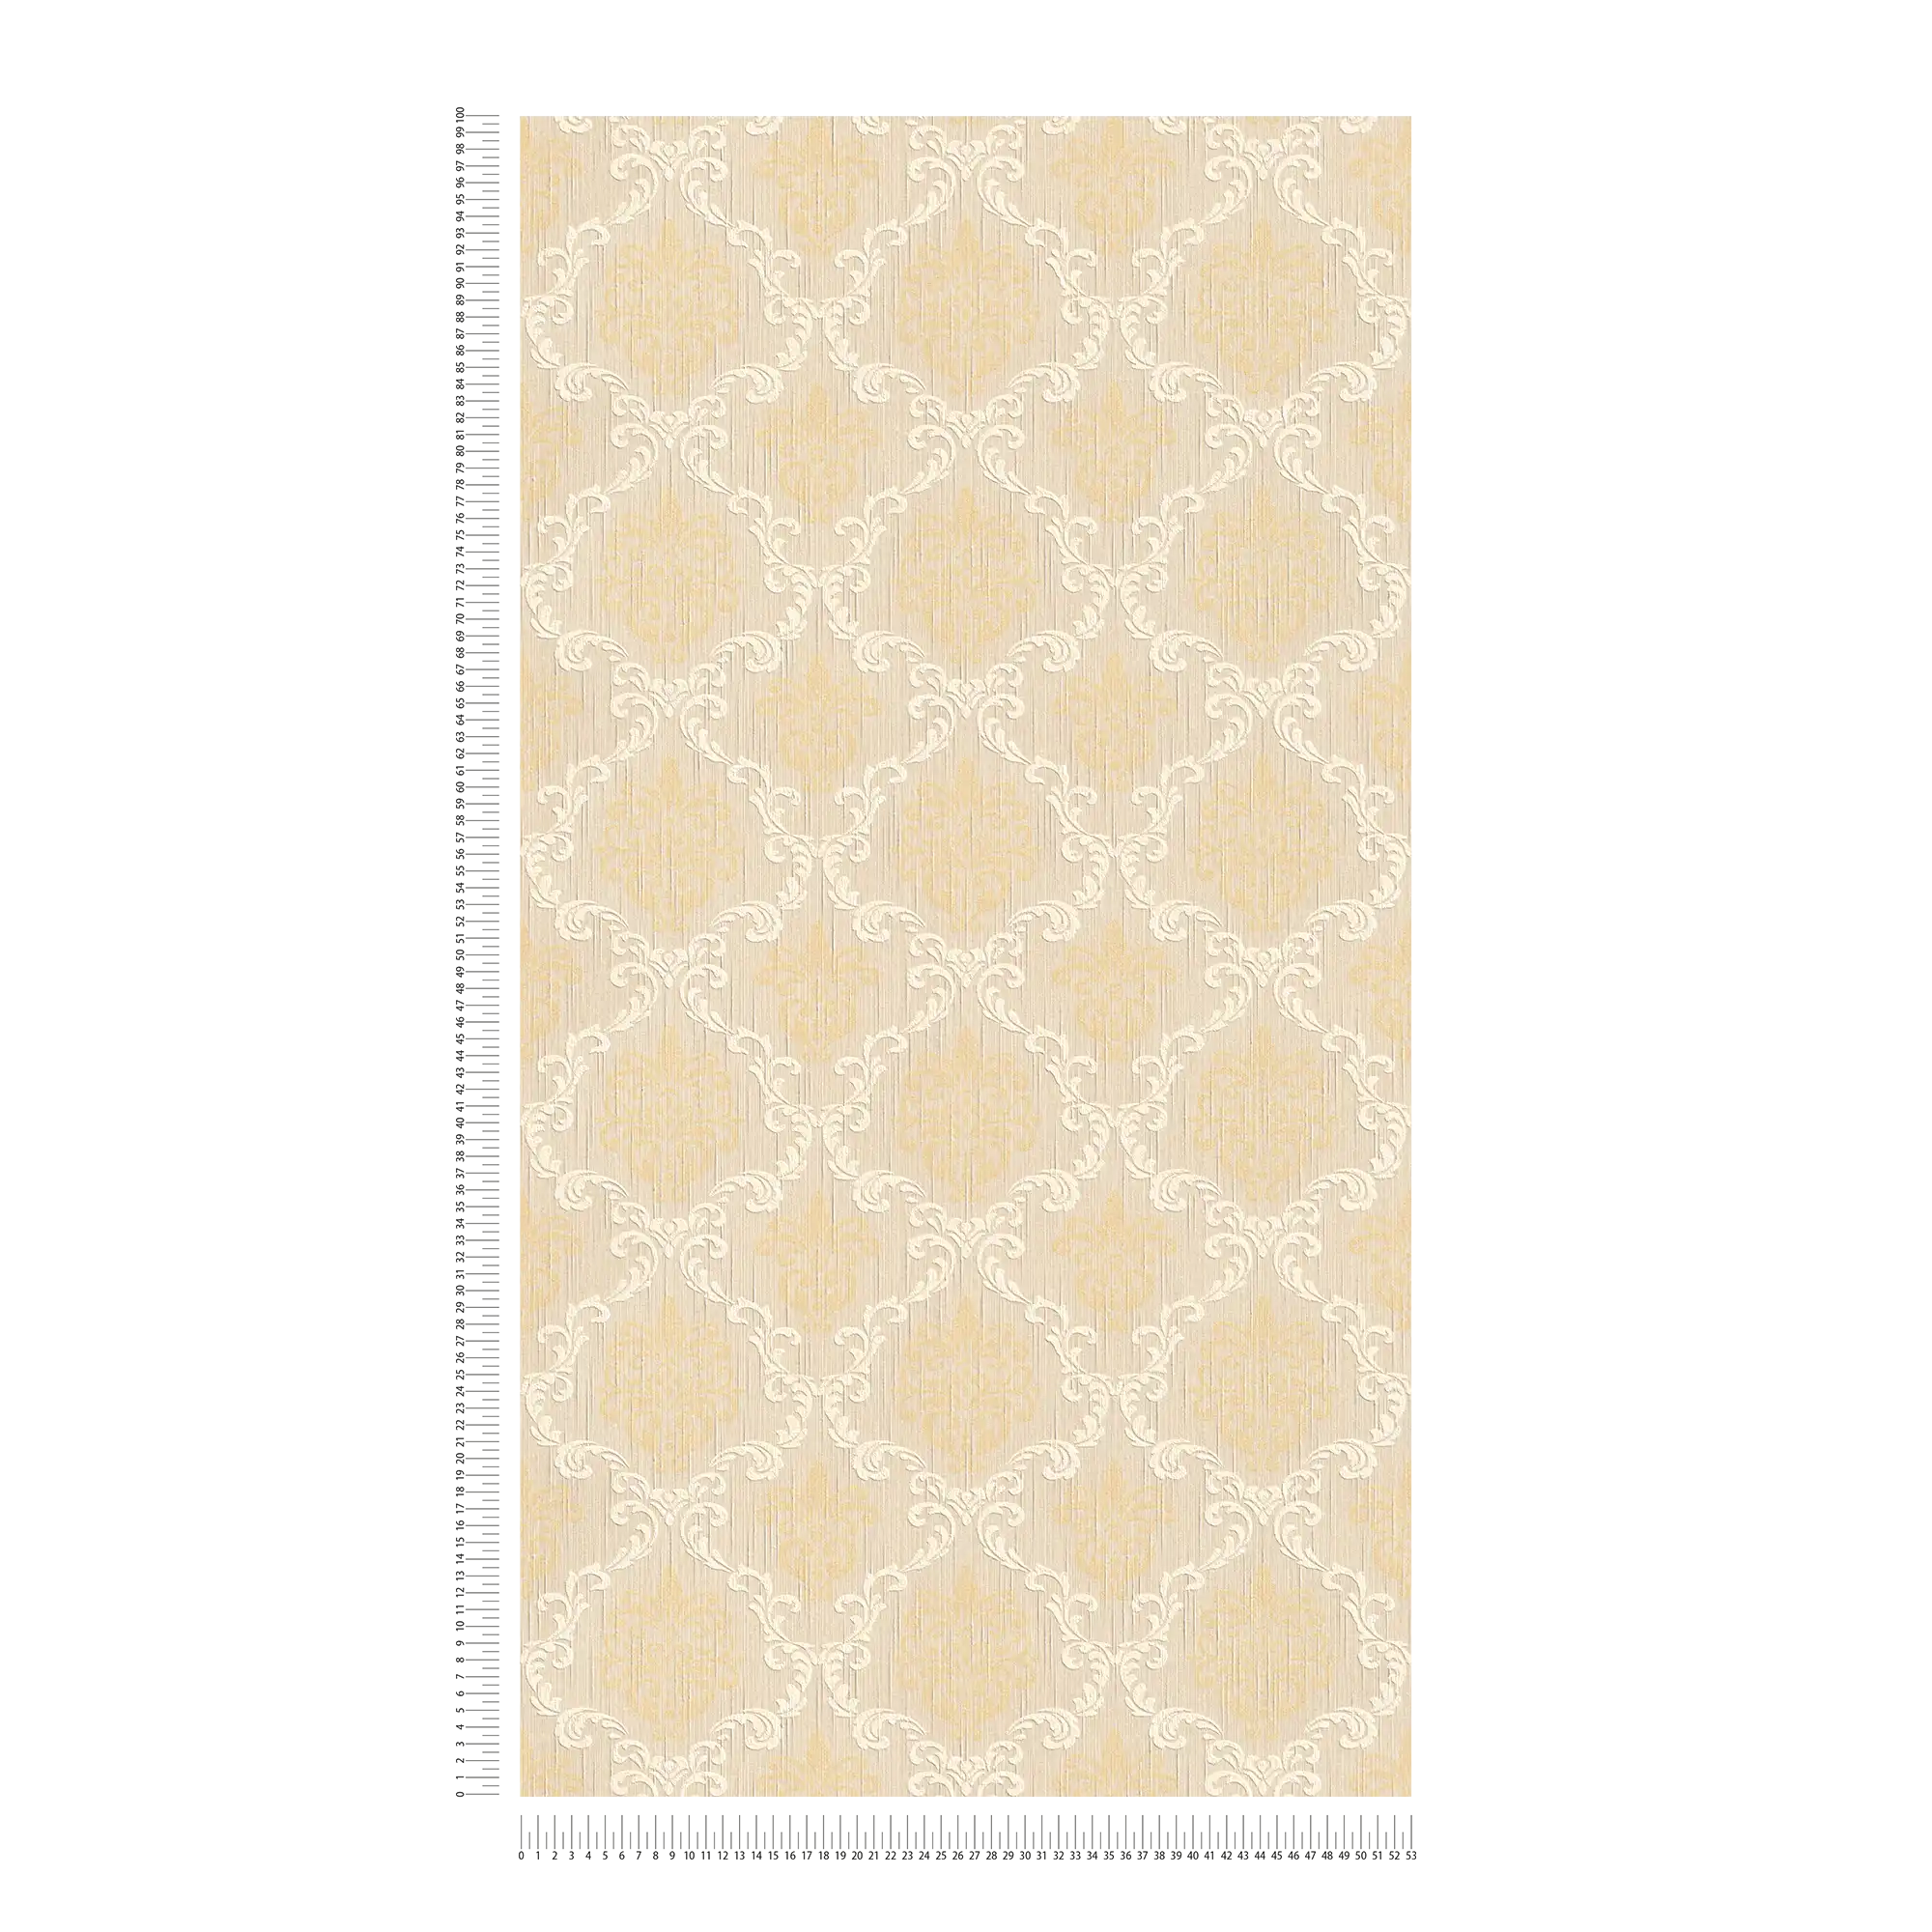             Wallpaper with ornament design in colonial style - beige
        